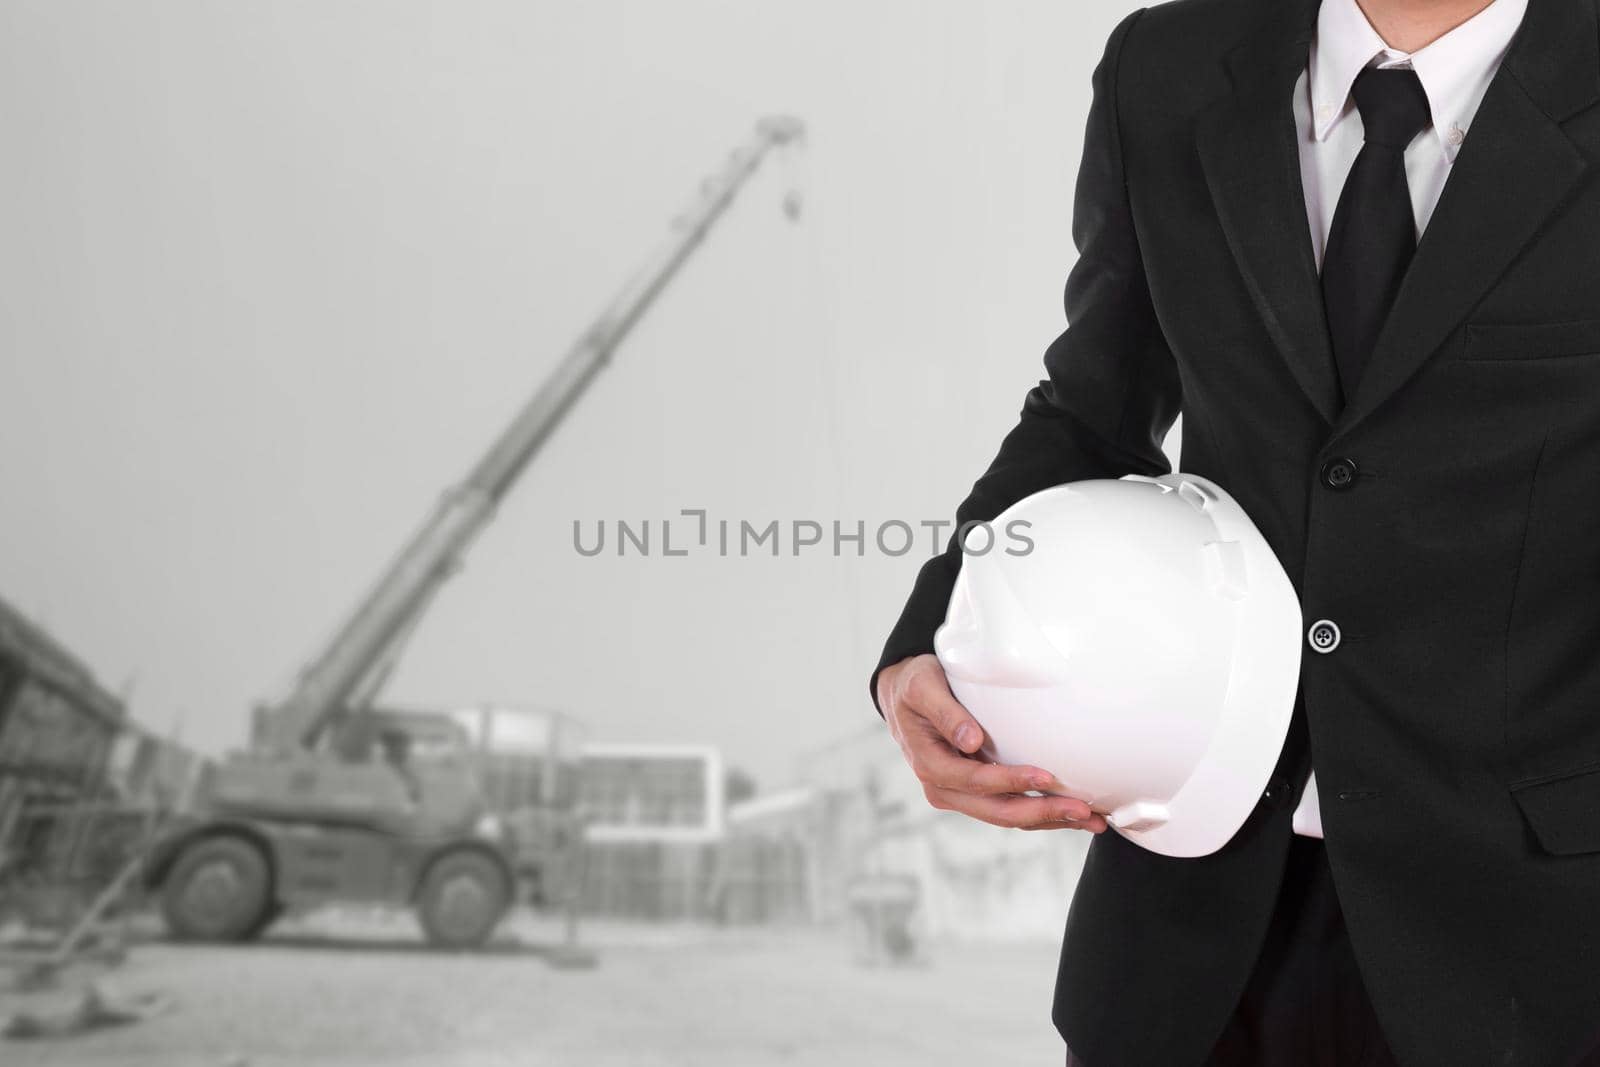 engineer holding white helmet with construction crane background